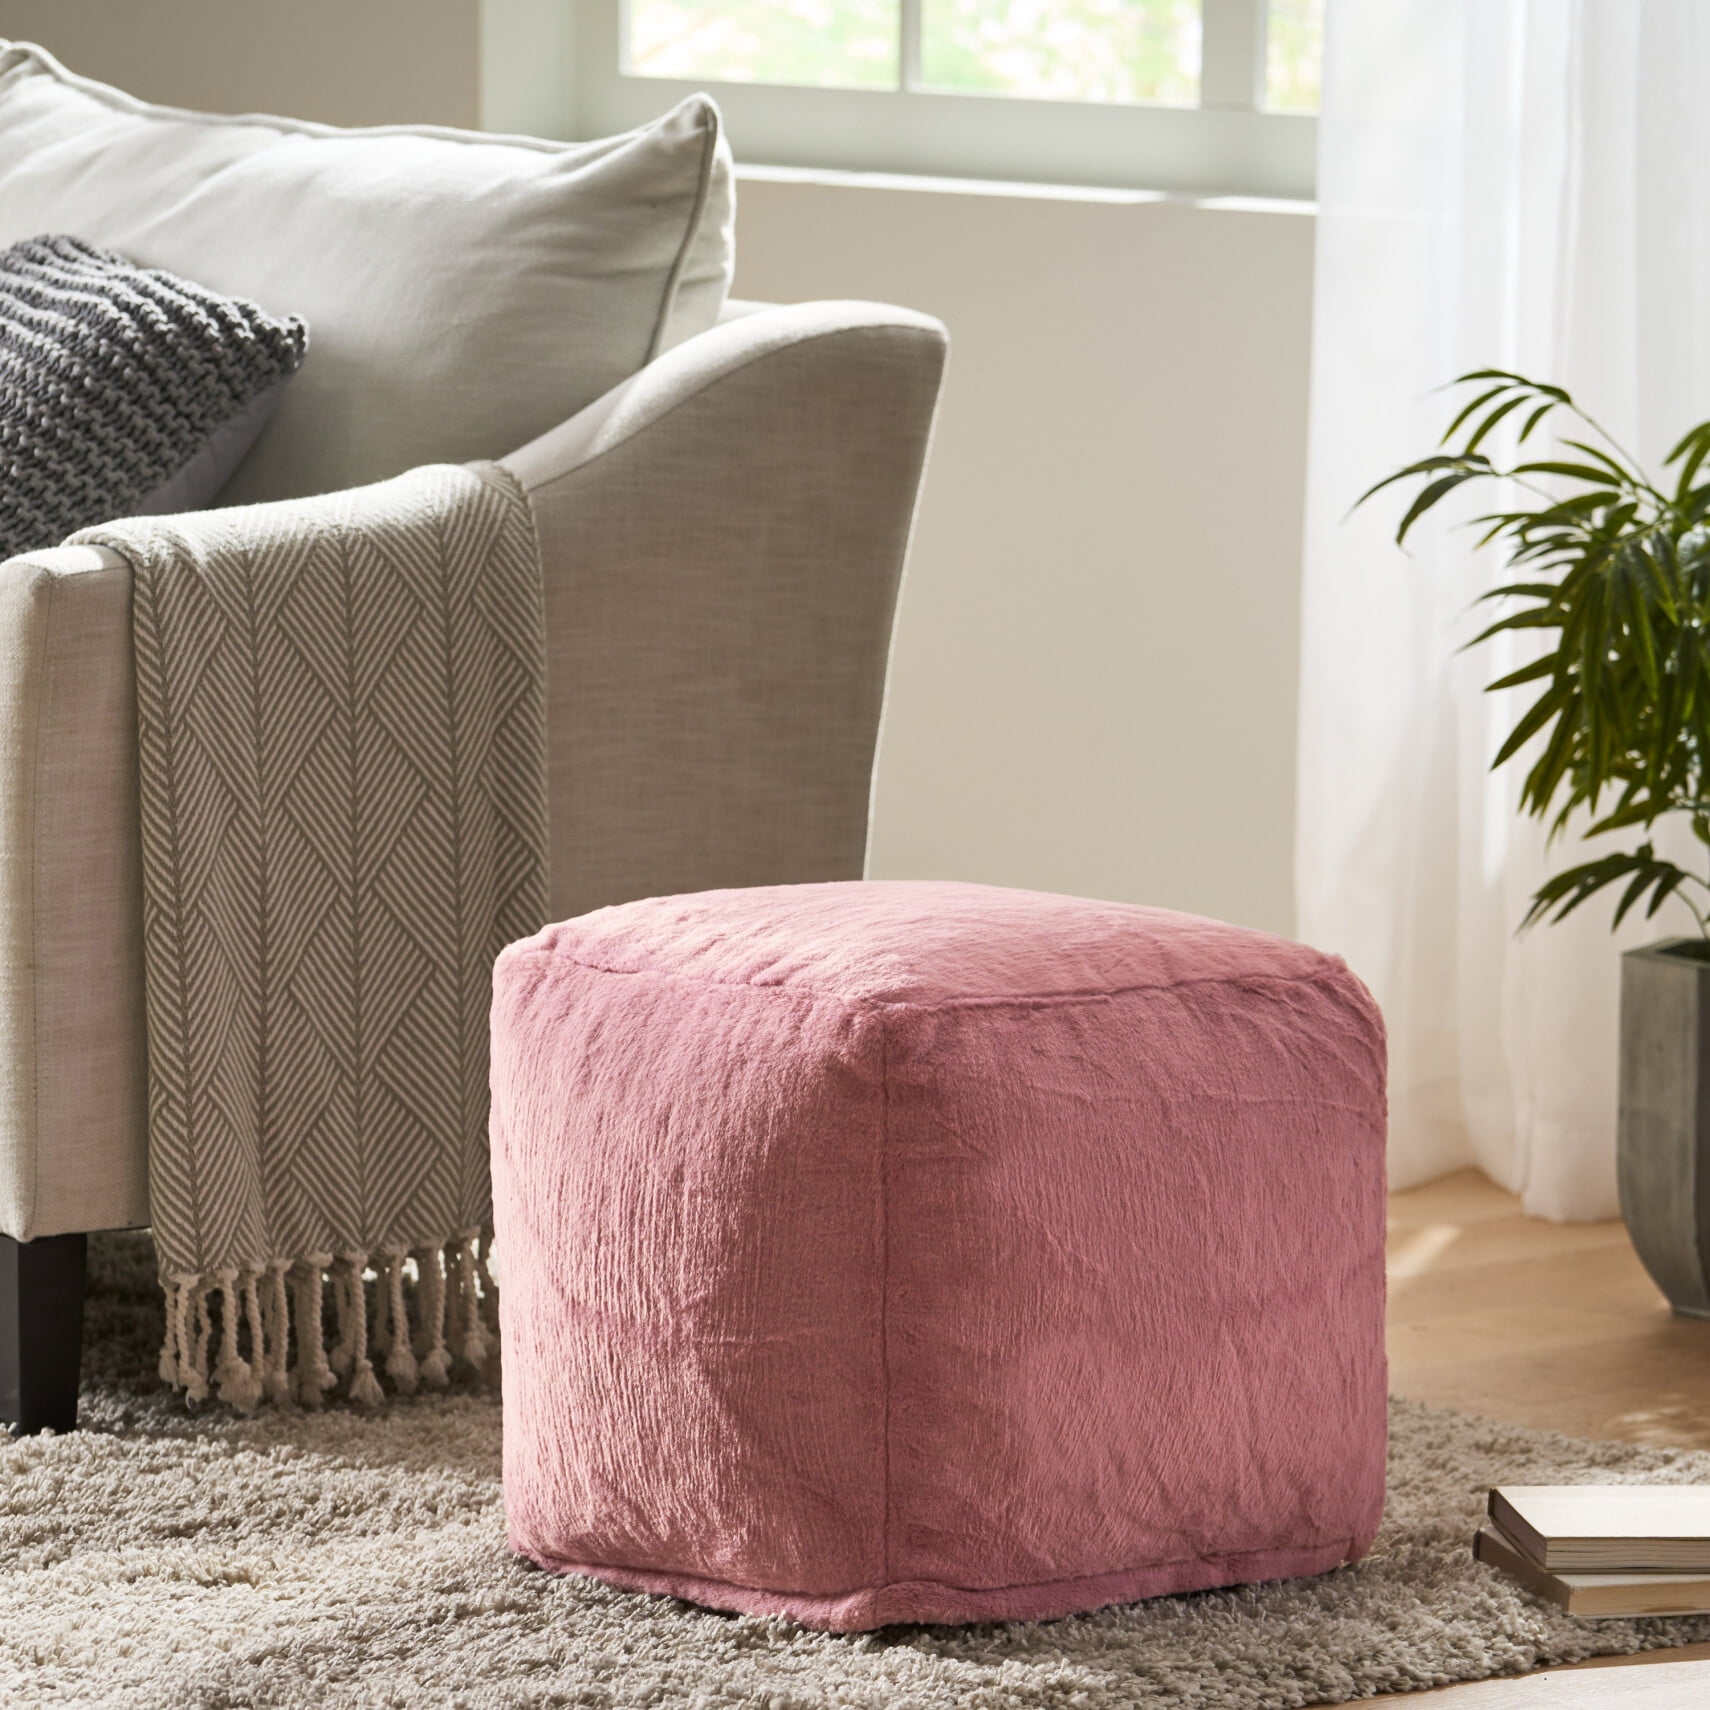 Poofieotto Pouf Ottoman Stuffed with PP Cotton Pouf Filler, Velvet Floor  Pouf,Round Ottoman Foot Stool Cushion Storage Ottoman, 20 * 12 Inches Foot